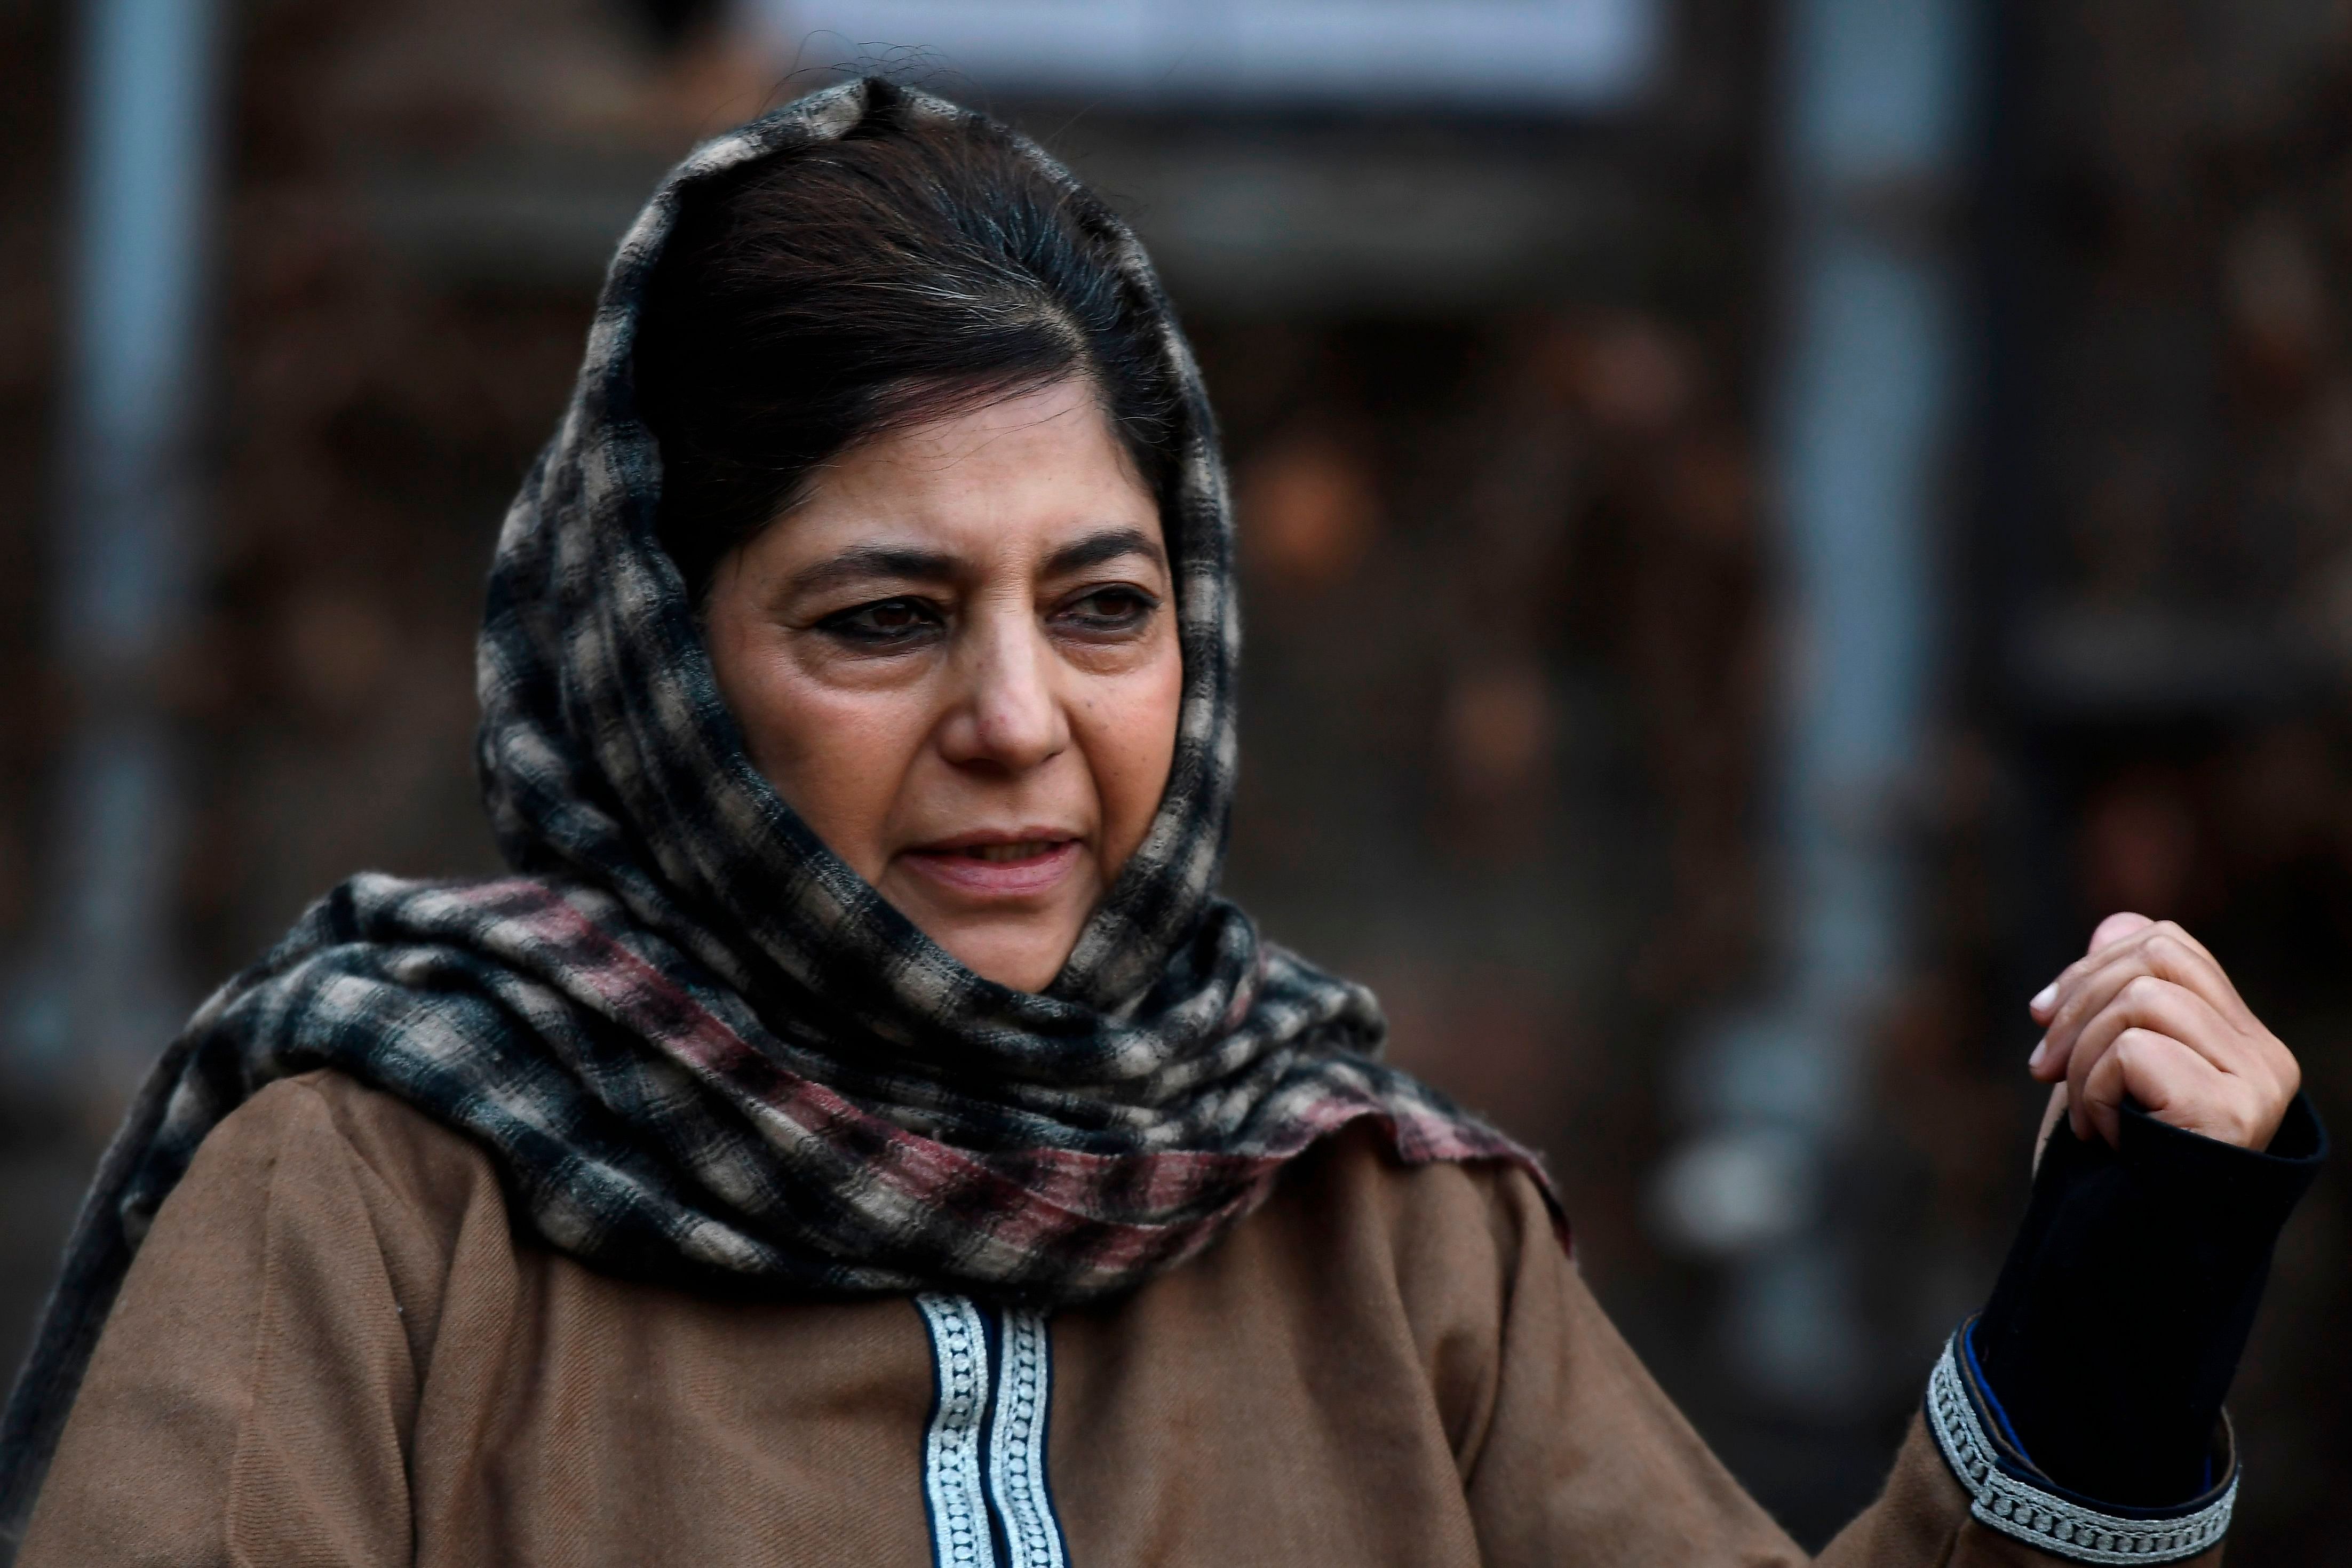 Peoples Democratic Party (PDP) leader and former chief minister of Jammu and Kashmir Mehbooba Mufti speaks during a press conference at her house in Srinagar on December 23, 2020. Create: AFP Photo